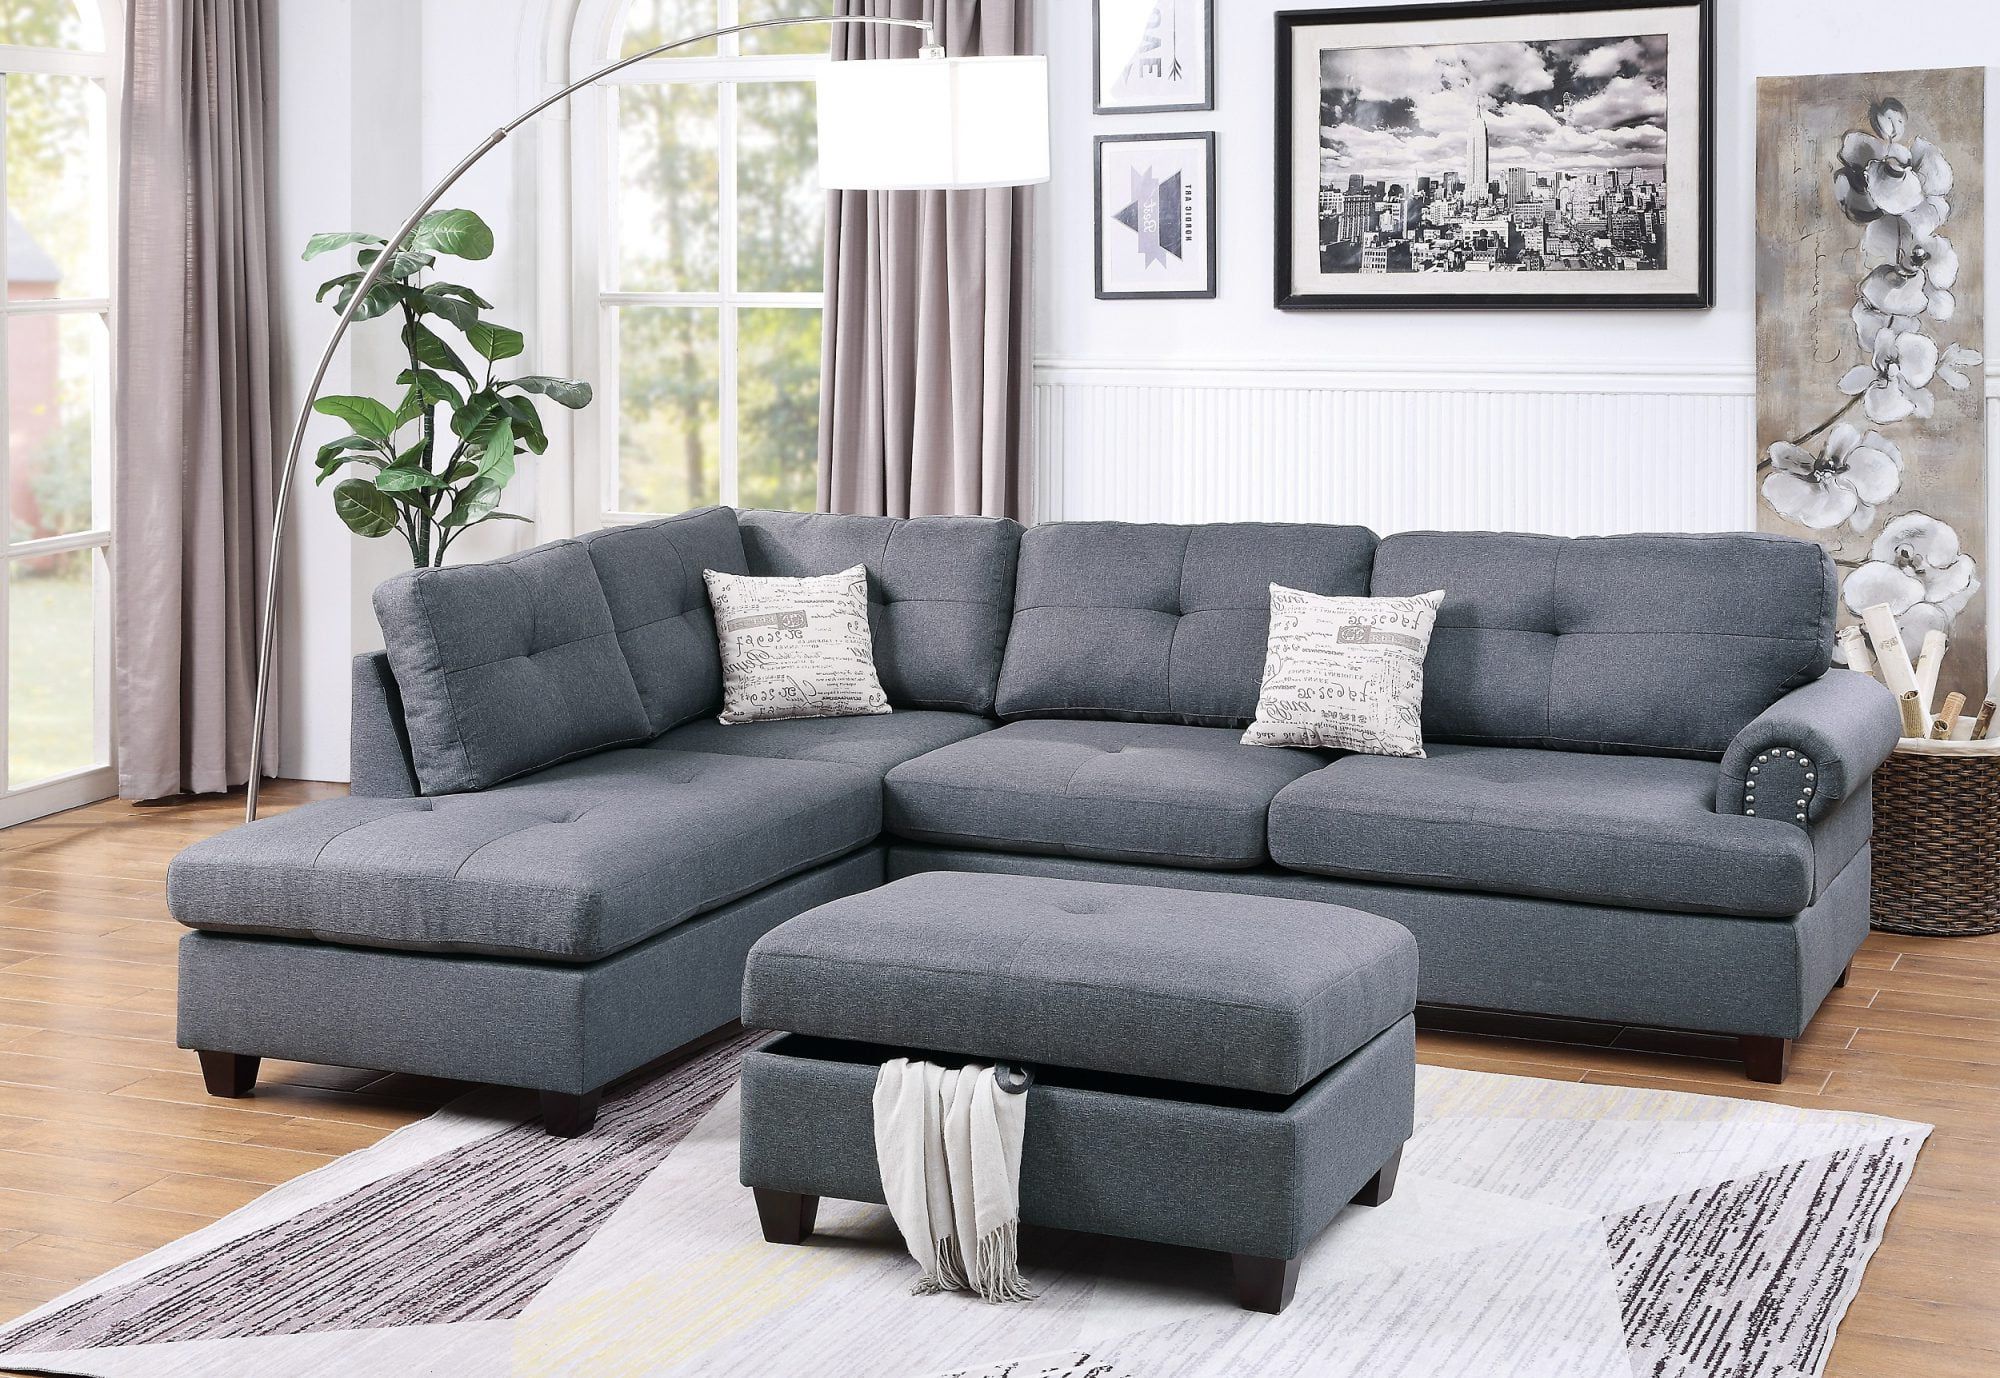 Newest Blue Grey Reversible L/r Sectional Sofa Set Polyfiber Cushion Chaise Inside Reversible Sectional Sofas (View 15 of 15)